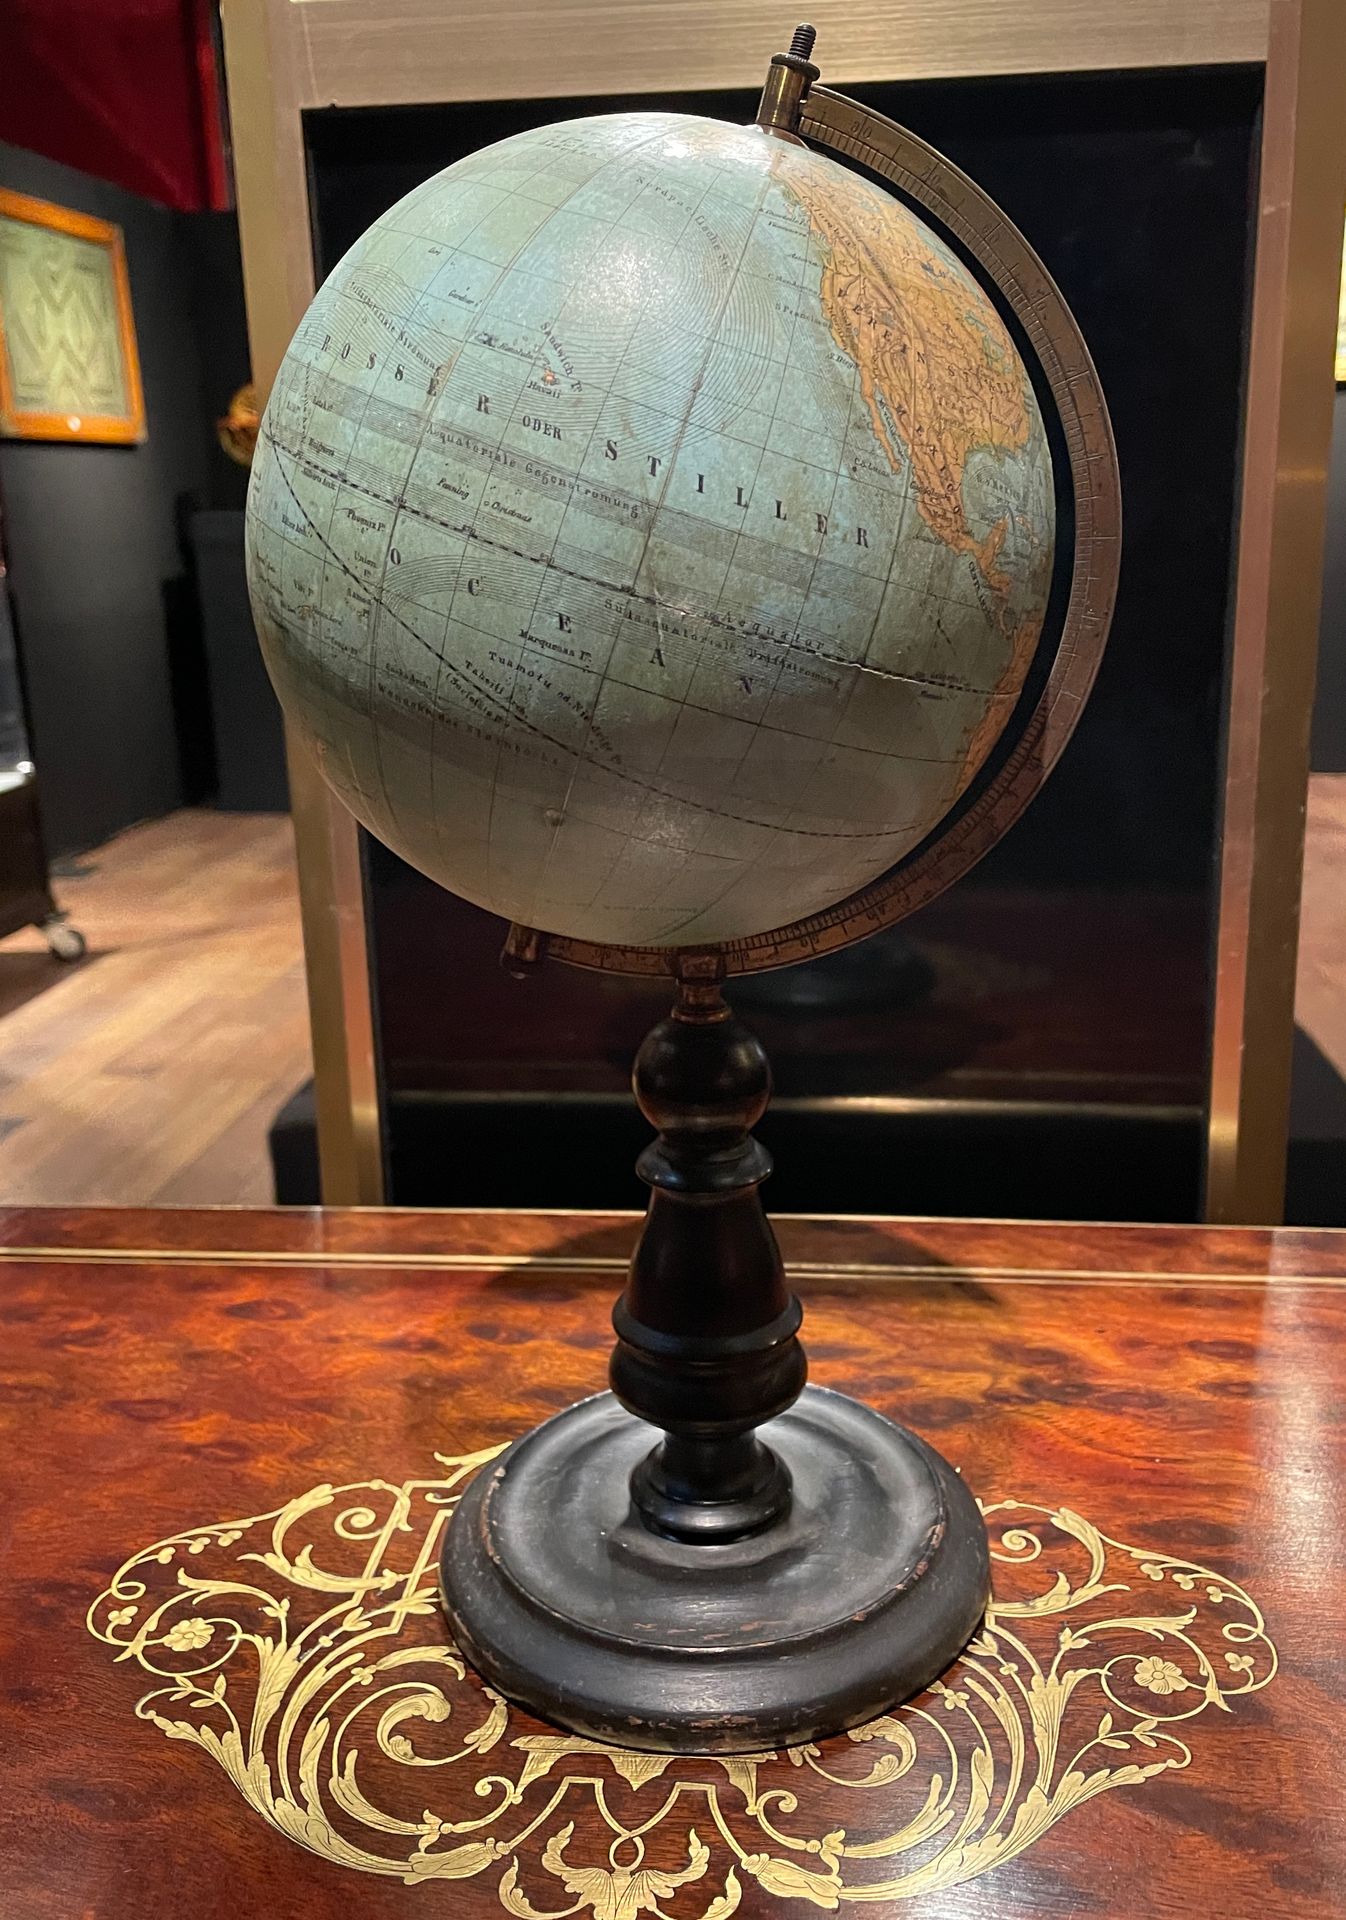 Null Small globe by SCOTTE in Berlin, brass and wood mount (damaged)
H. 35 cm